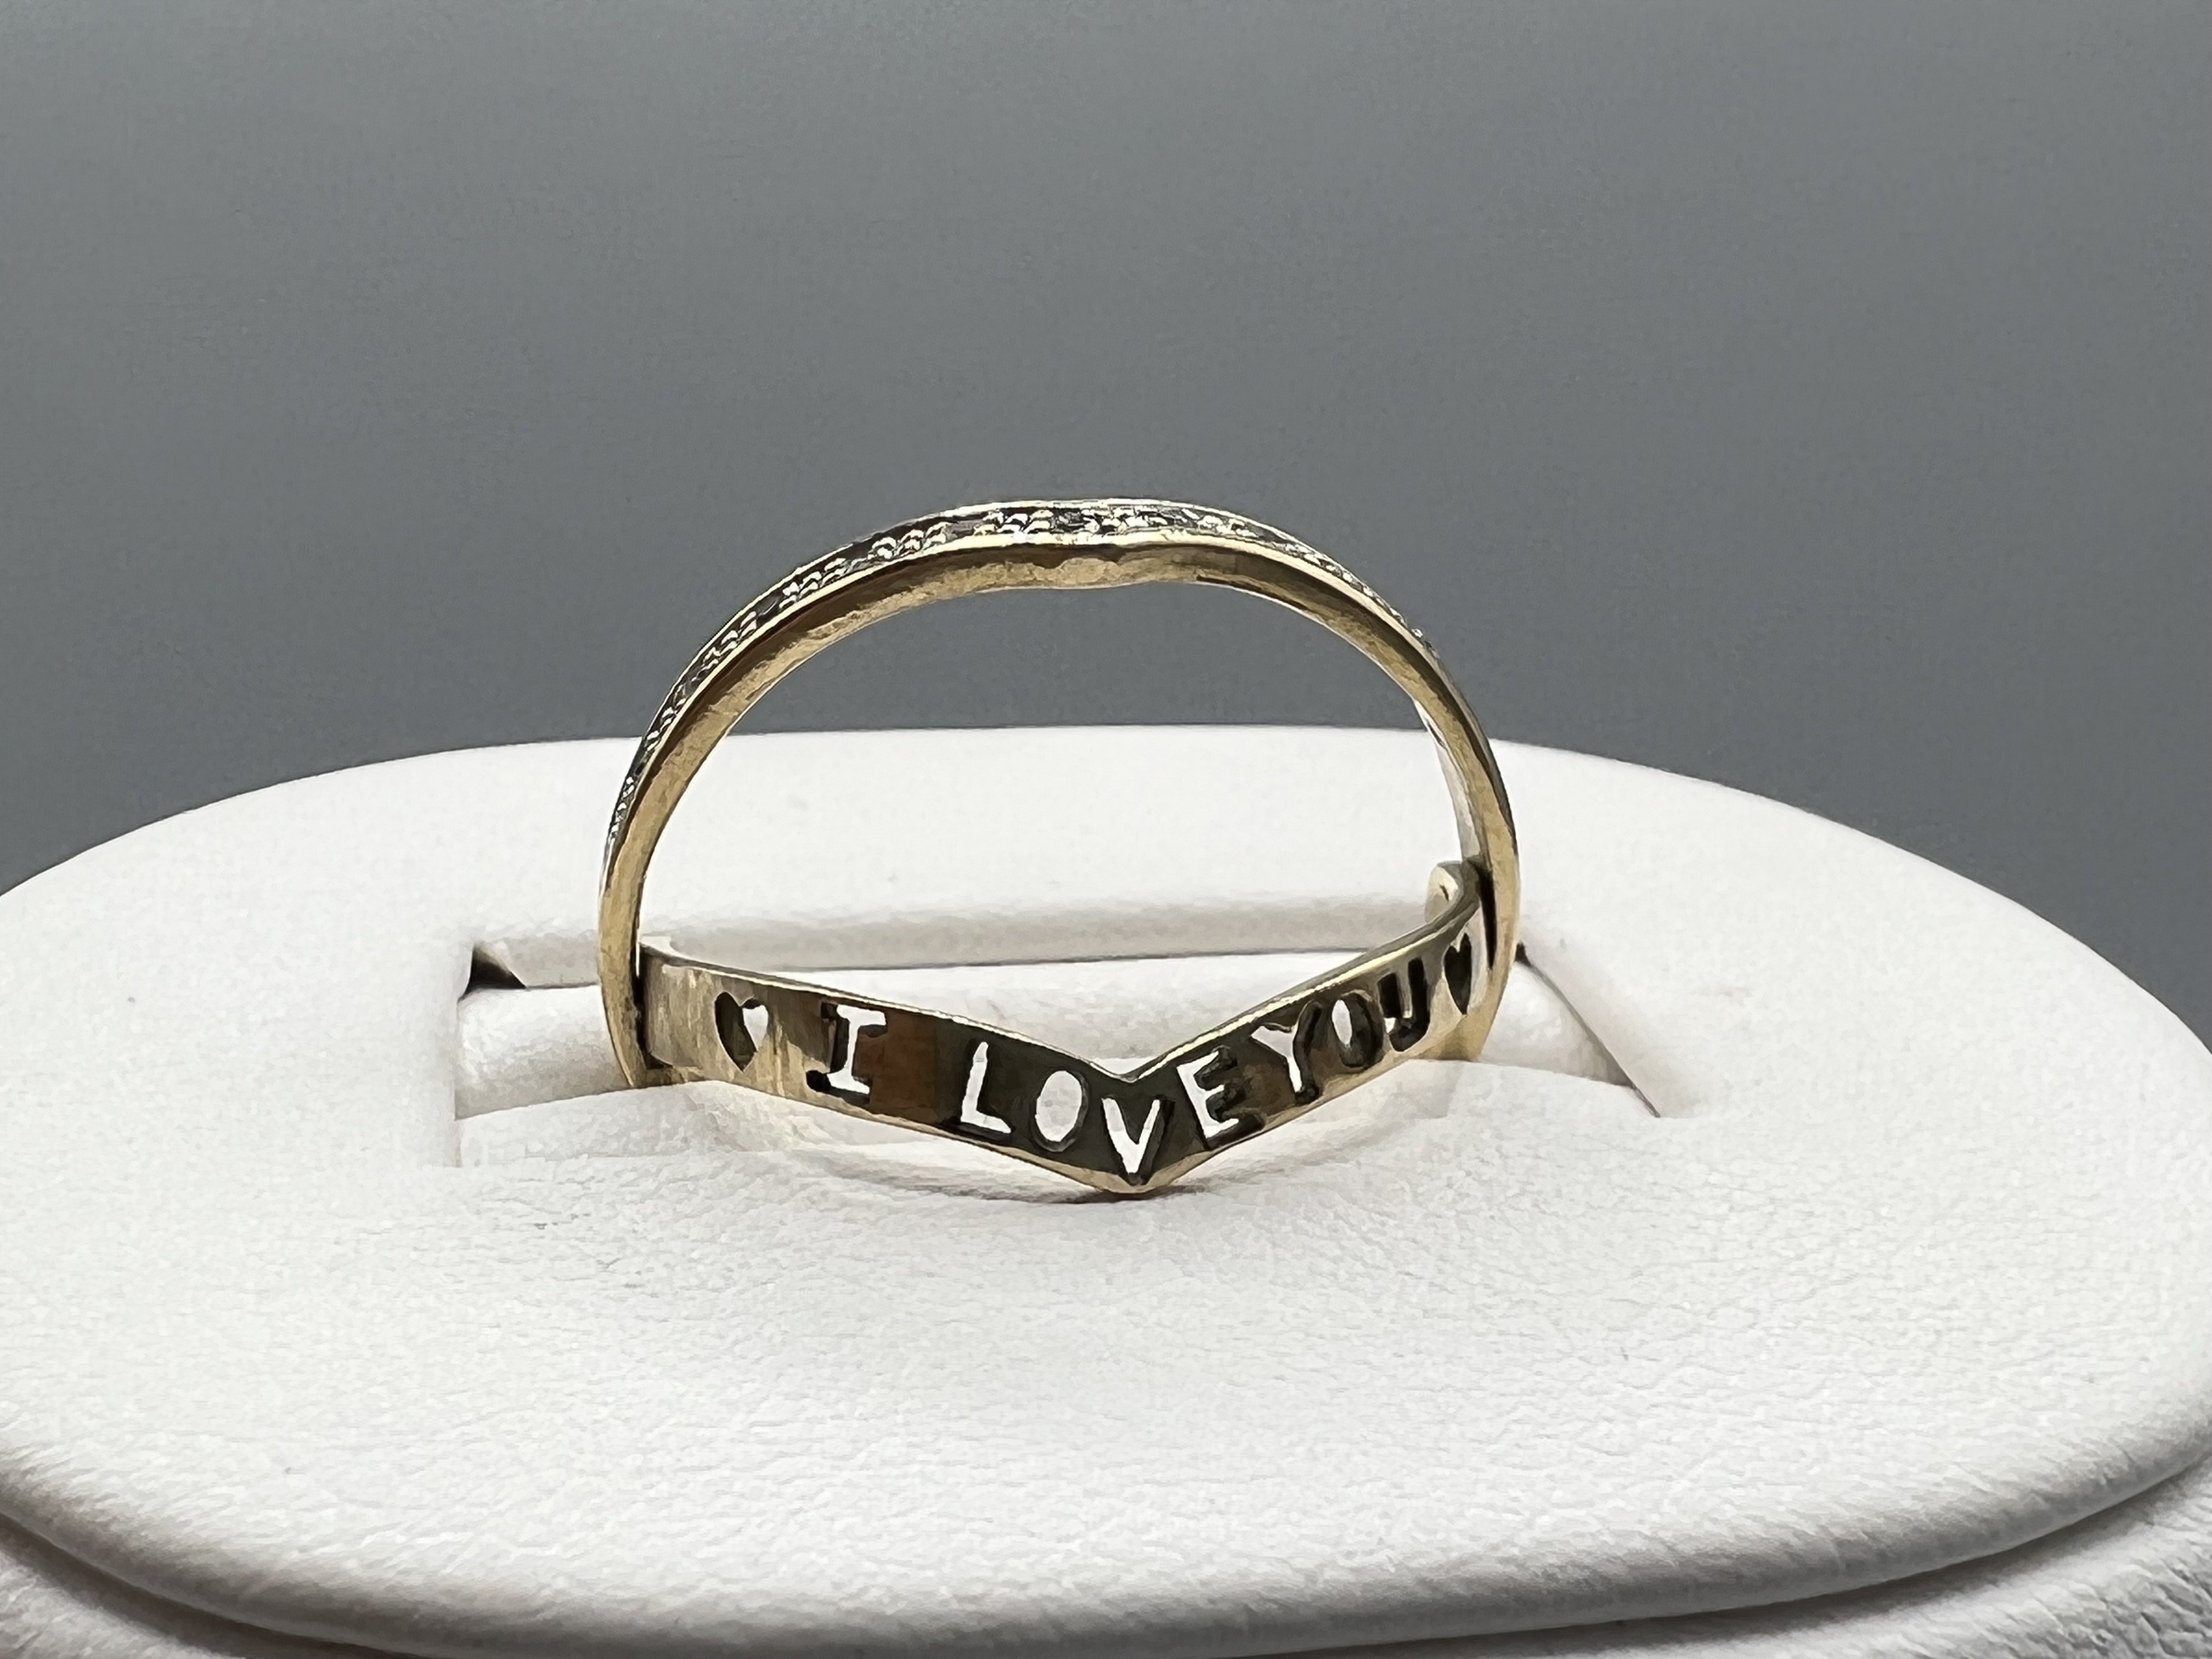 9ct Gold & Diamond Secret Message "I love you ring" - Size N - 2.2 grams - Image 3 of 3